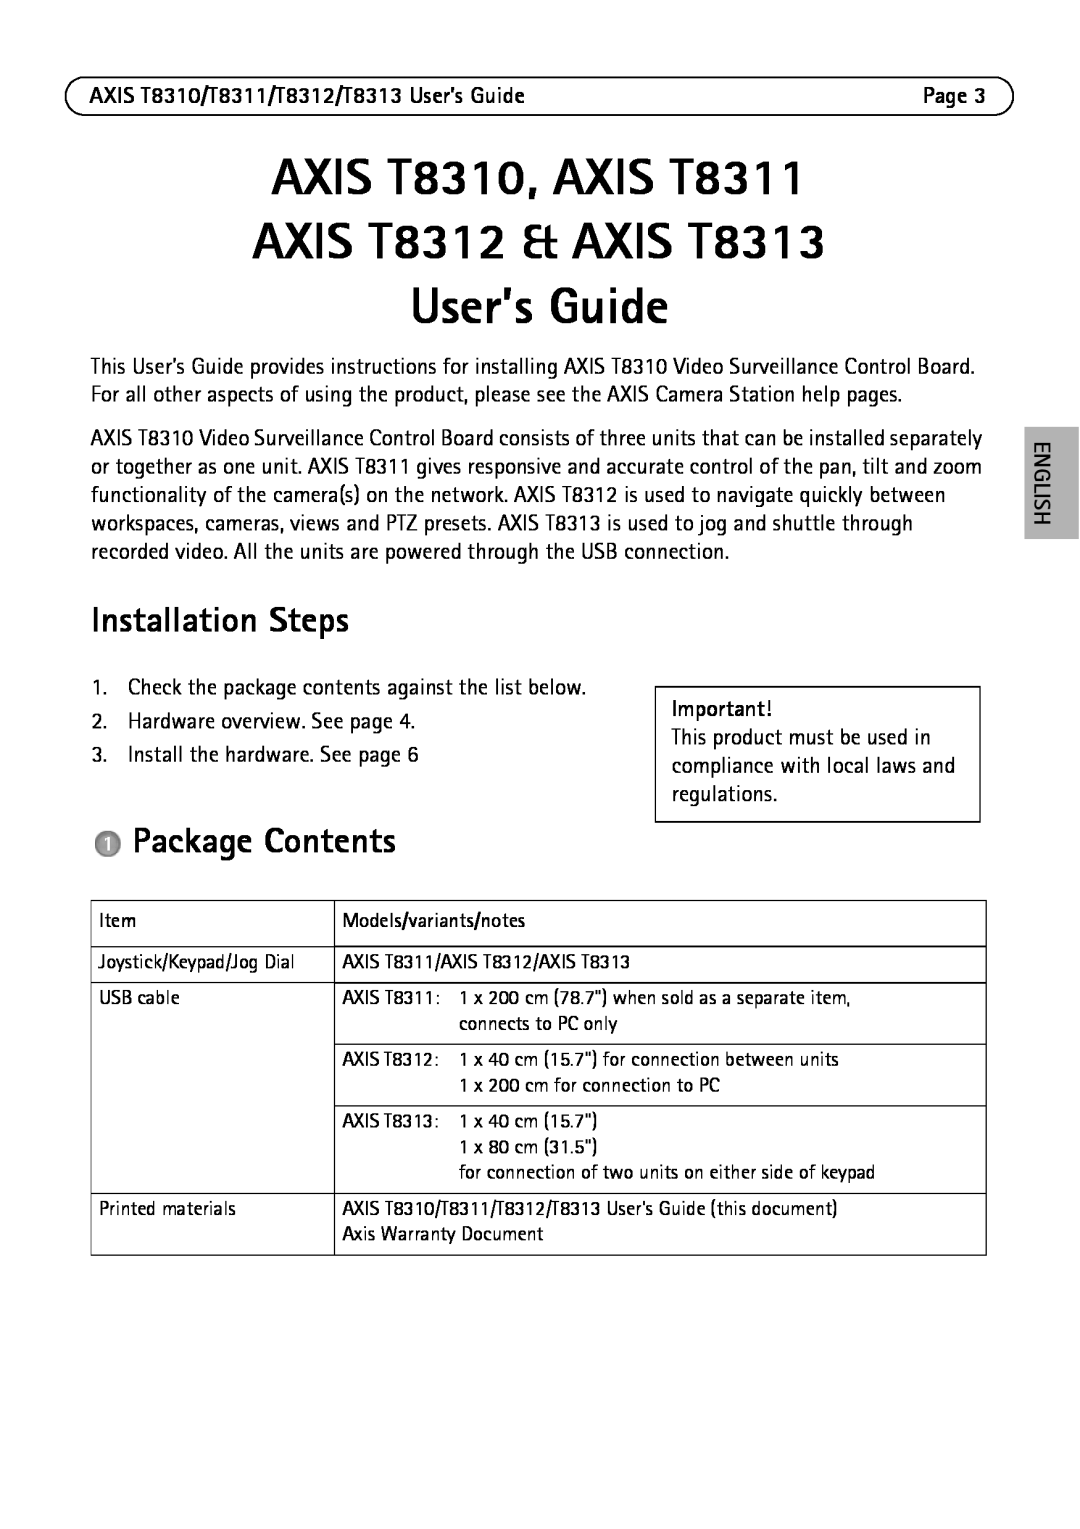 Axis Communications AXIS T8313 Installation Steps, Package Contents, AXIS T8310/T8311/T8312/T8313 User’s Guide, English 